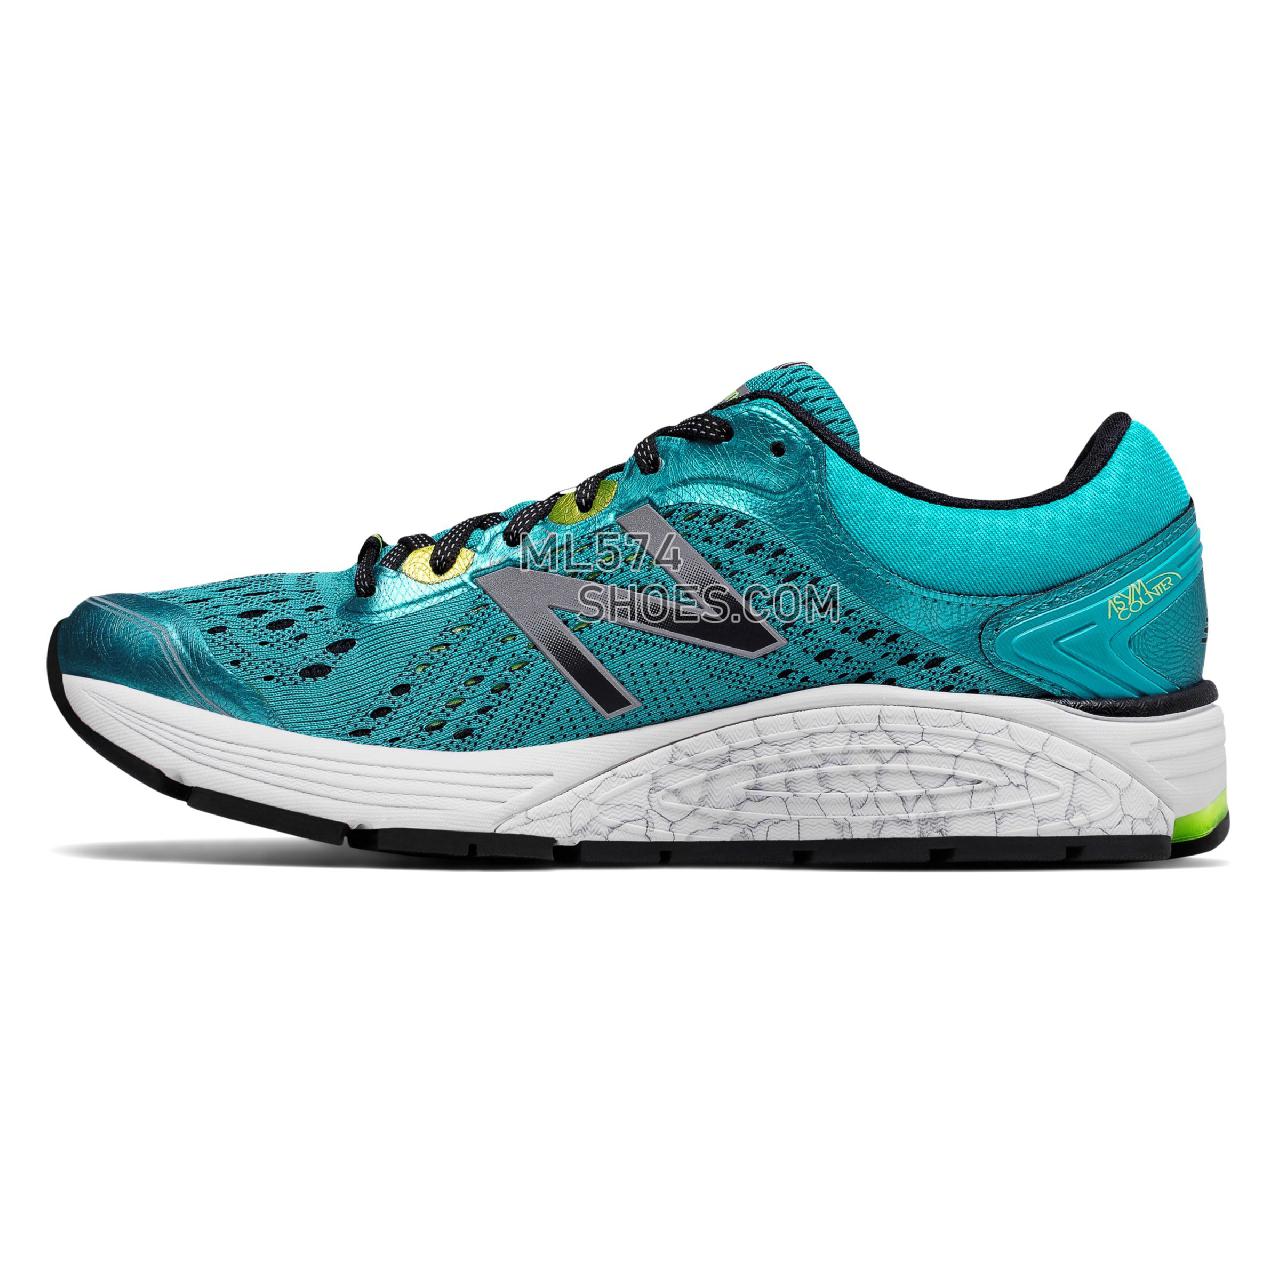 New Balance 1260v7 - Women's 1260 - Running Pisces with Lime Glo - W1260BY7